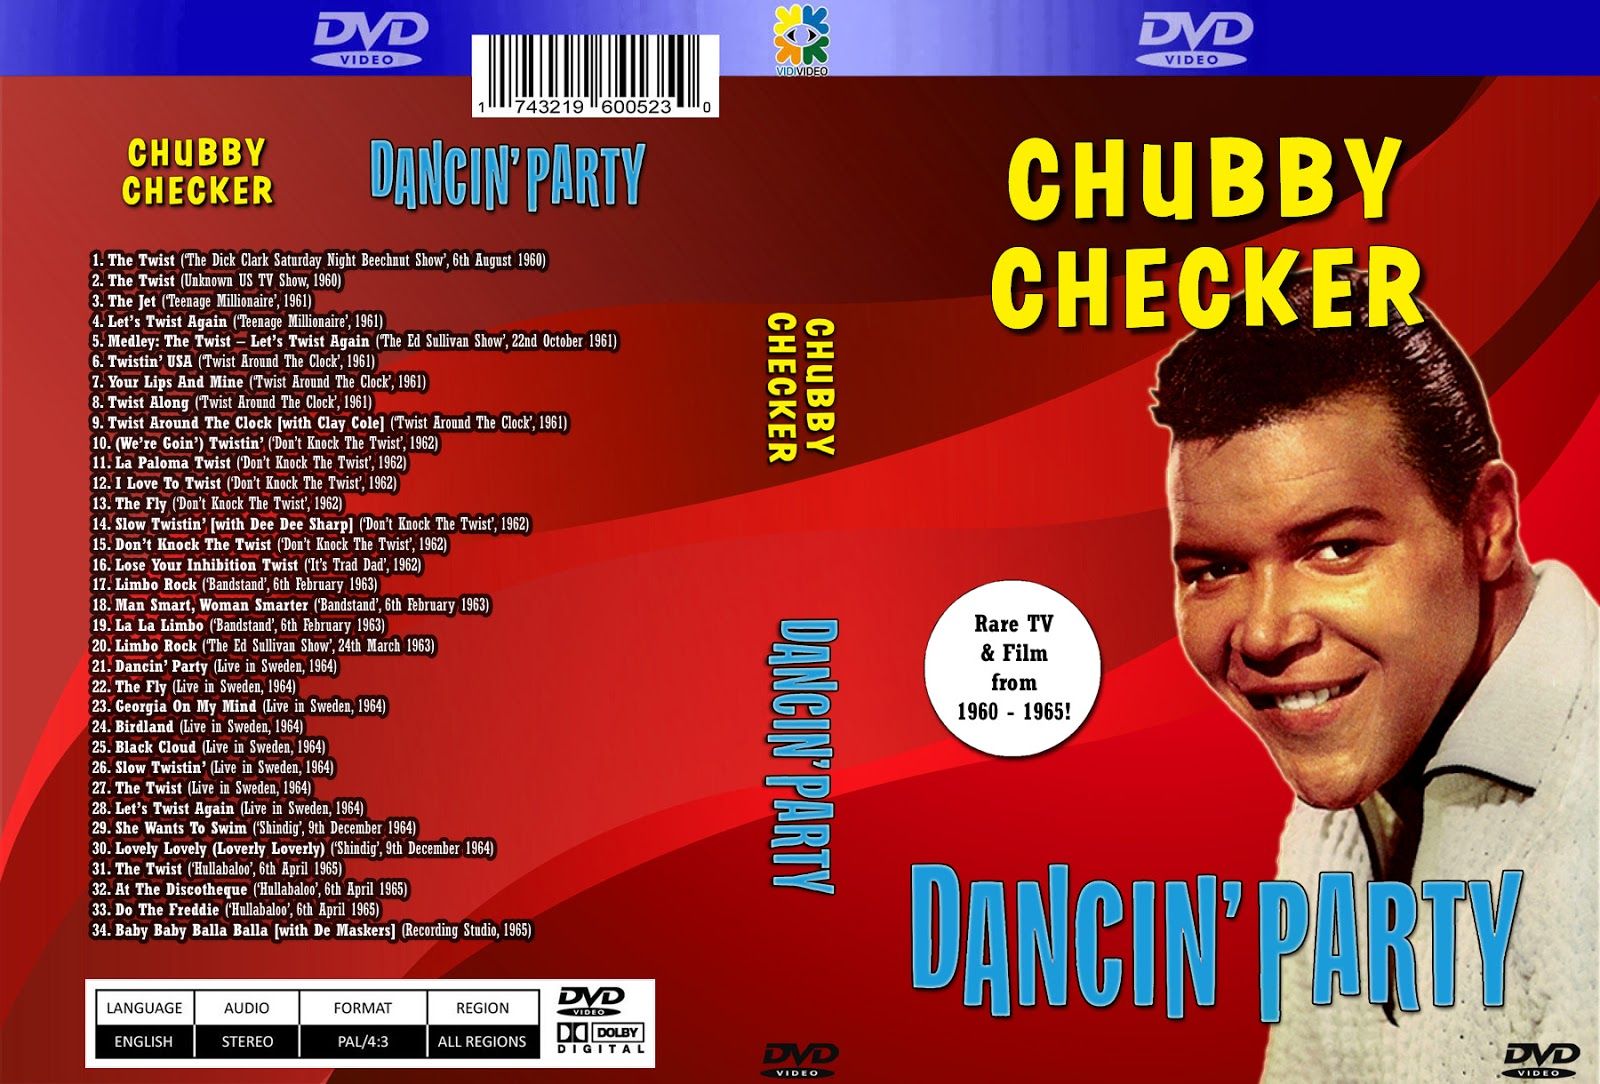 Chubby checkers evans